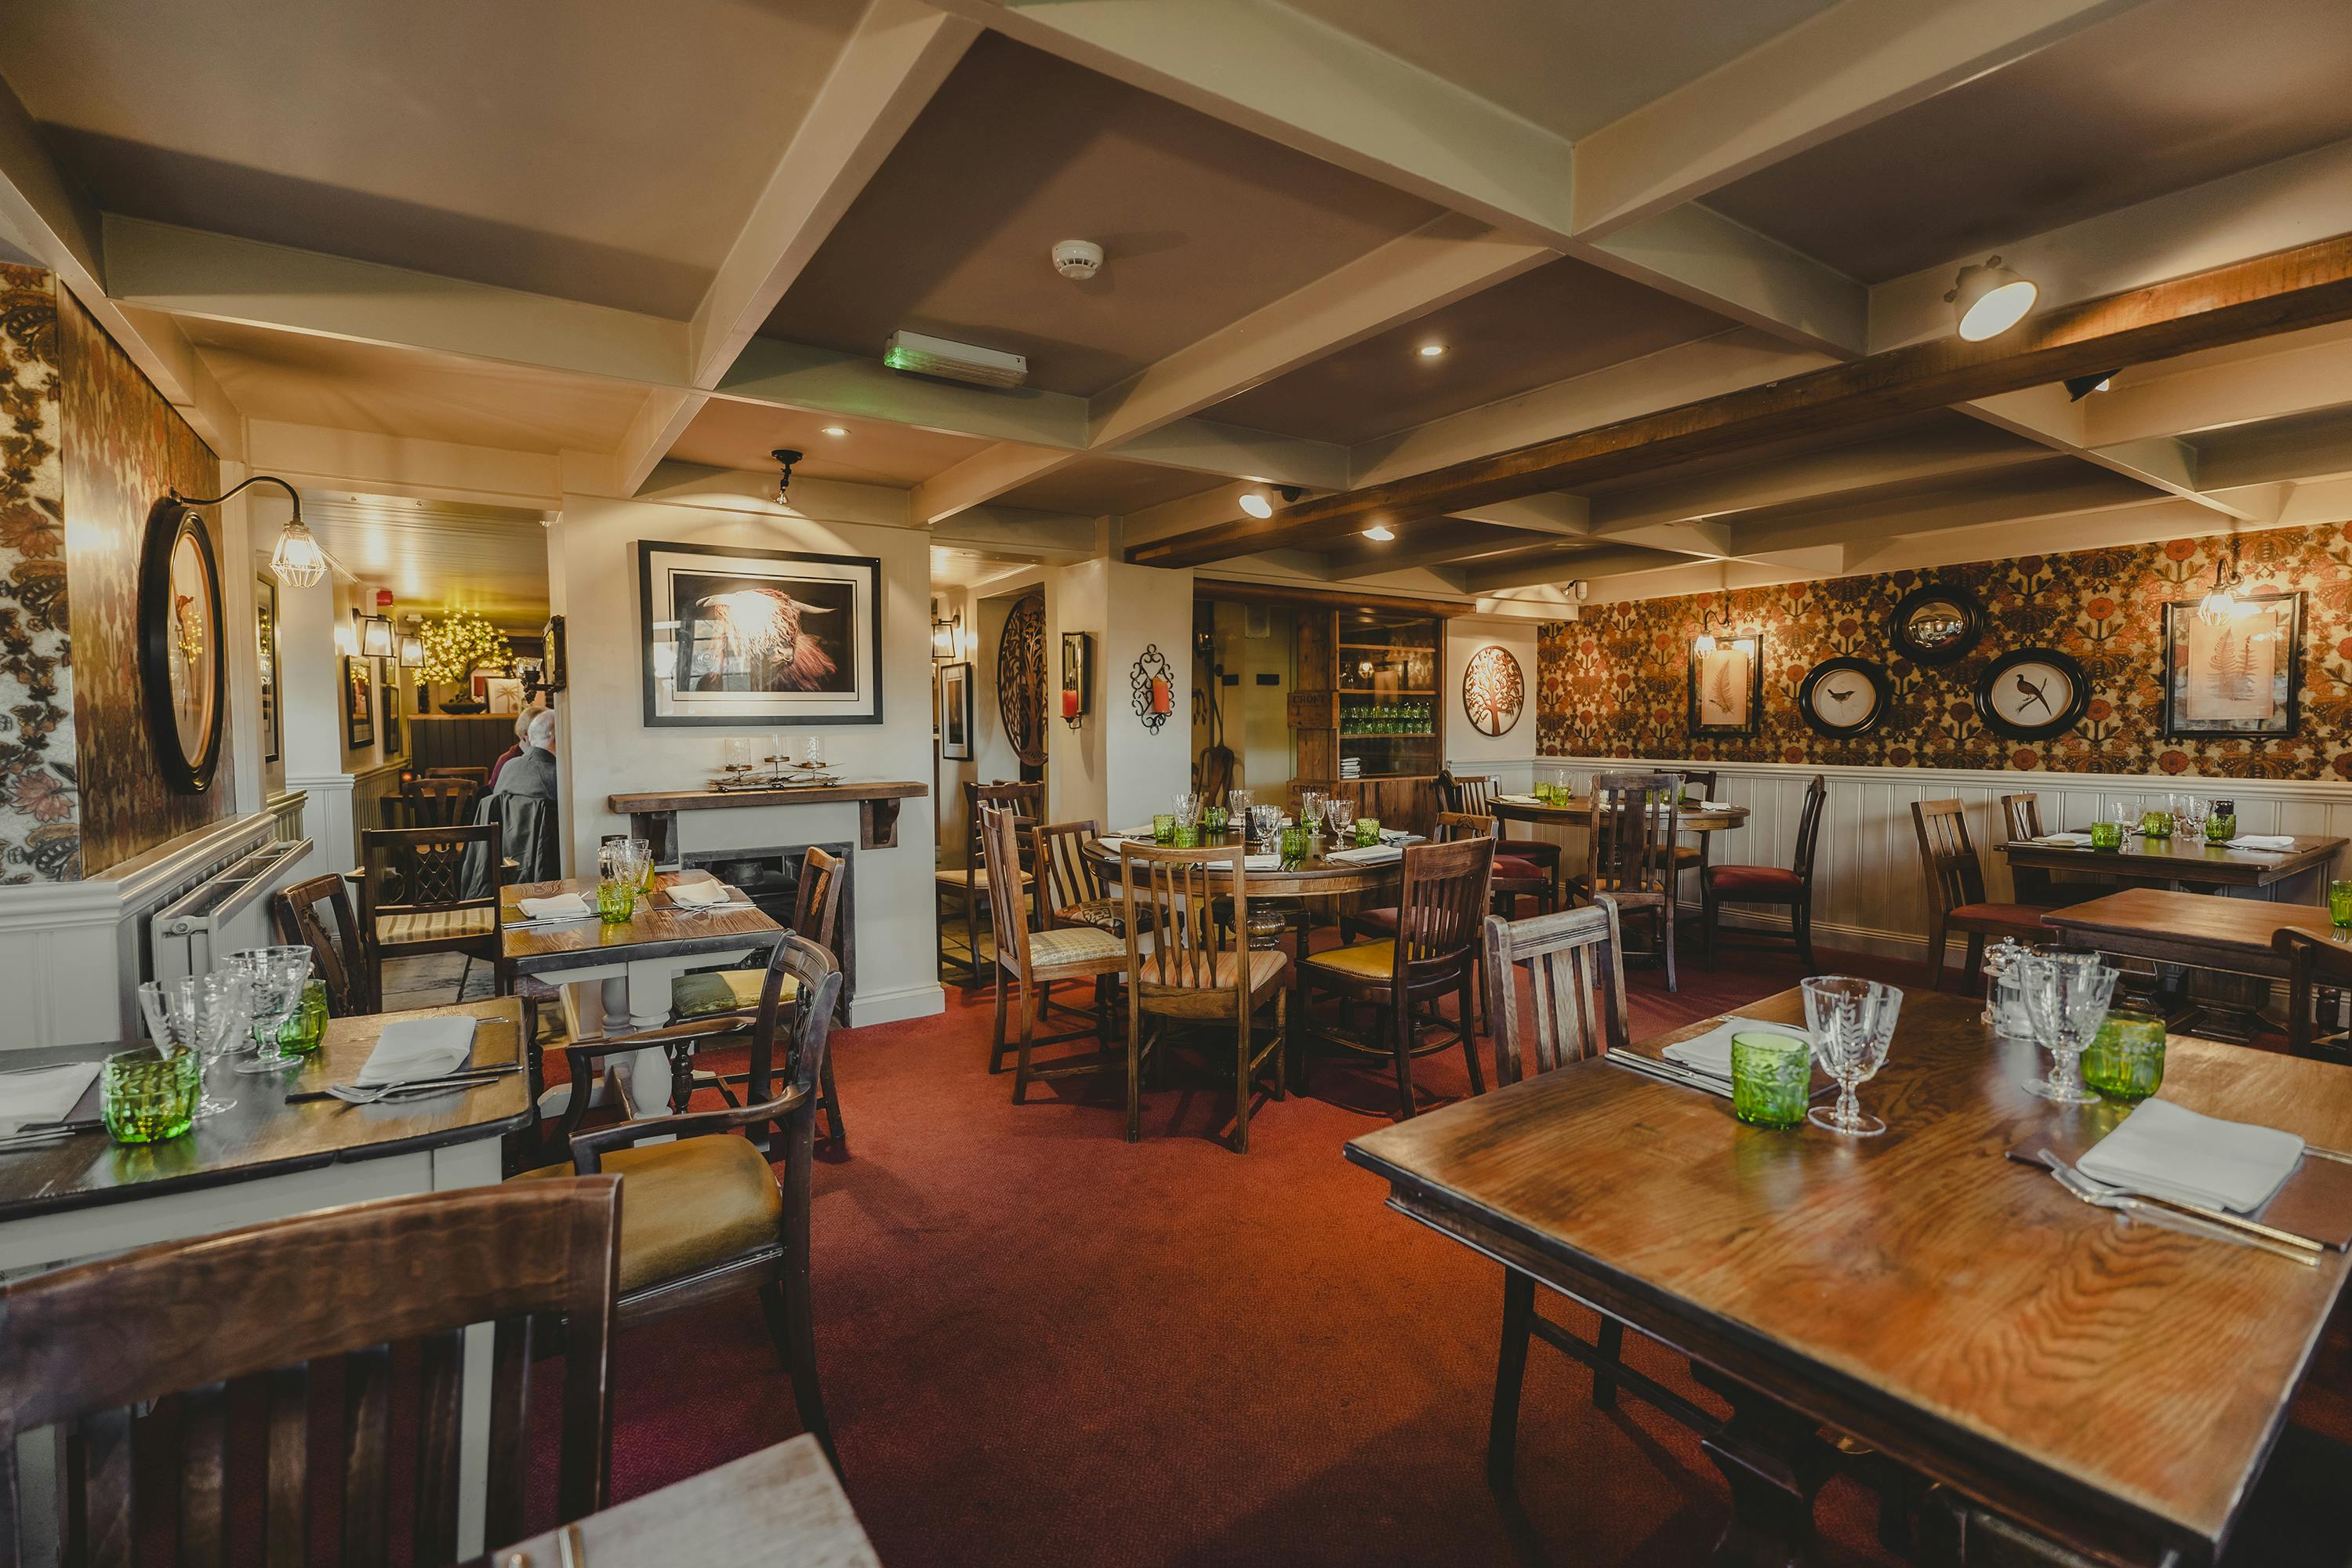 Welcome to The Rockingham Arms